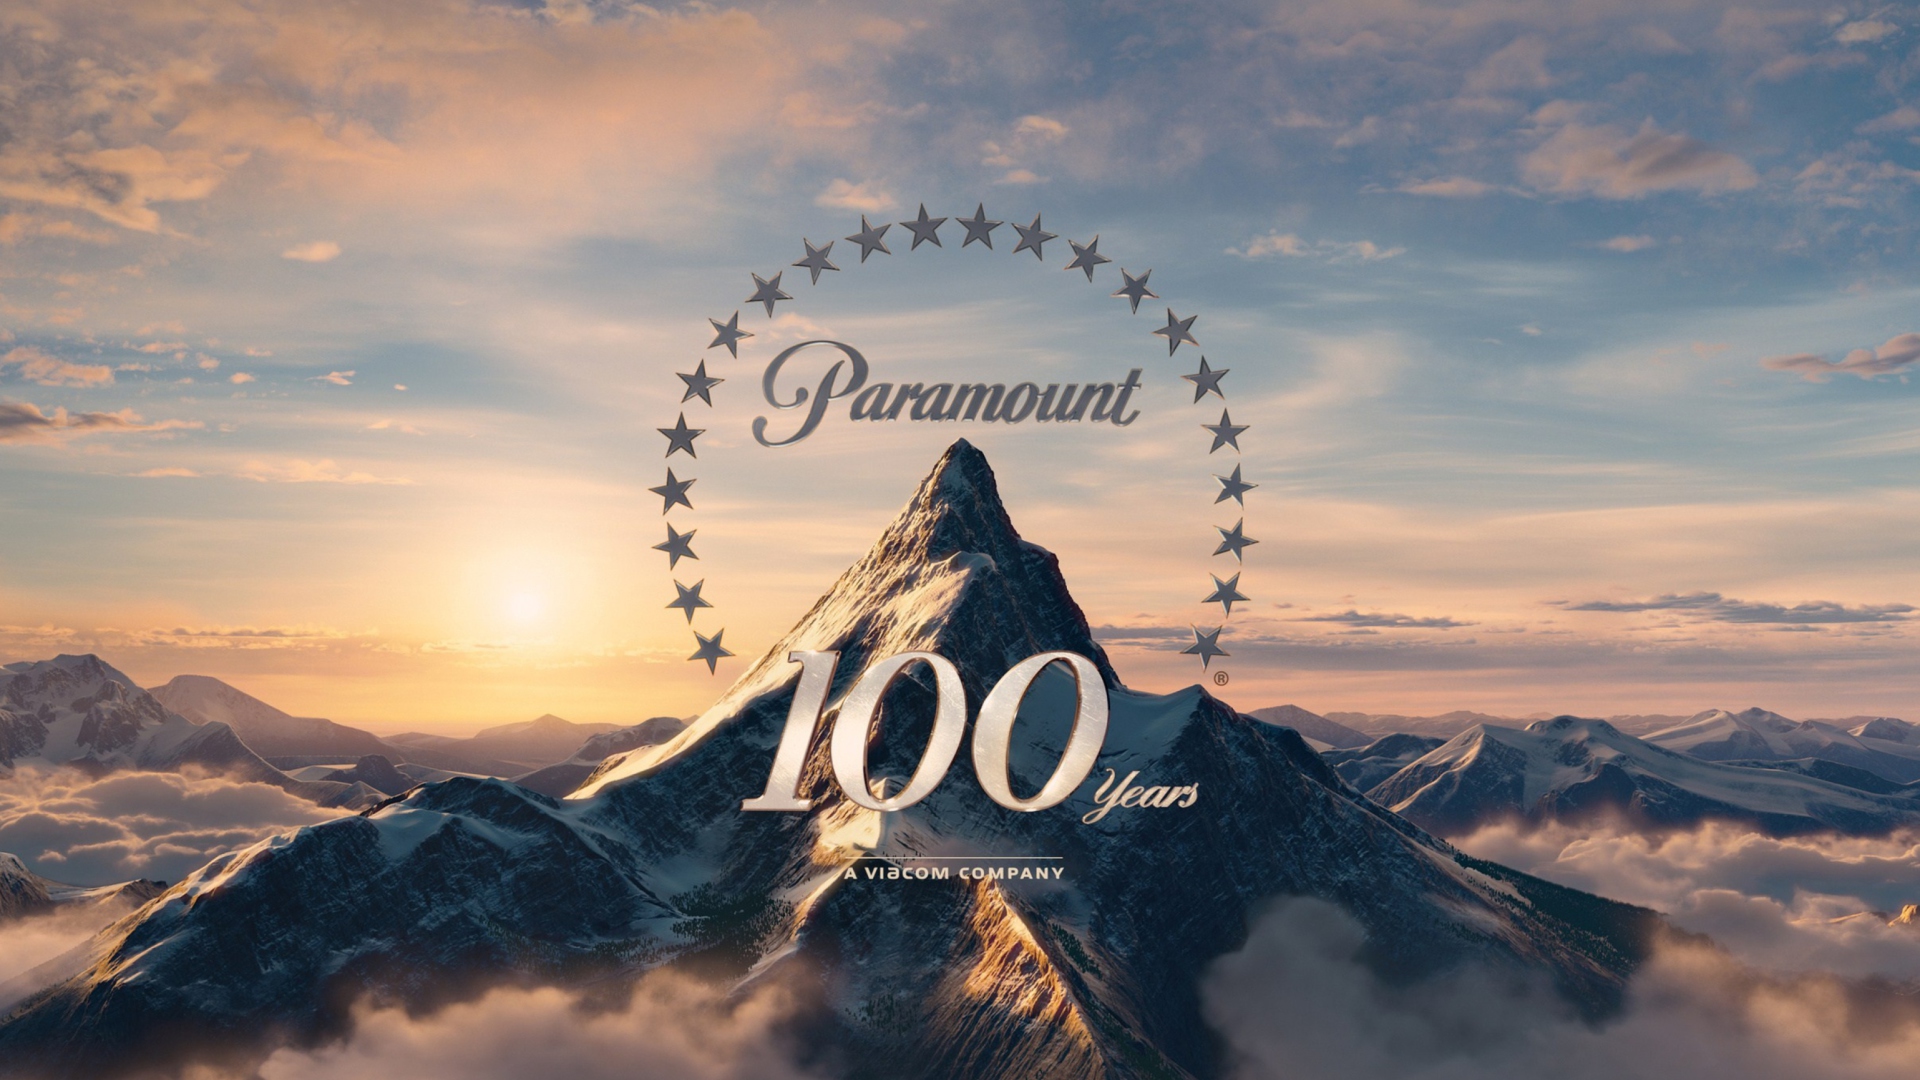 Paramount Pictures 100 Years screenshot #1 1920x1080